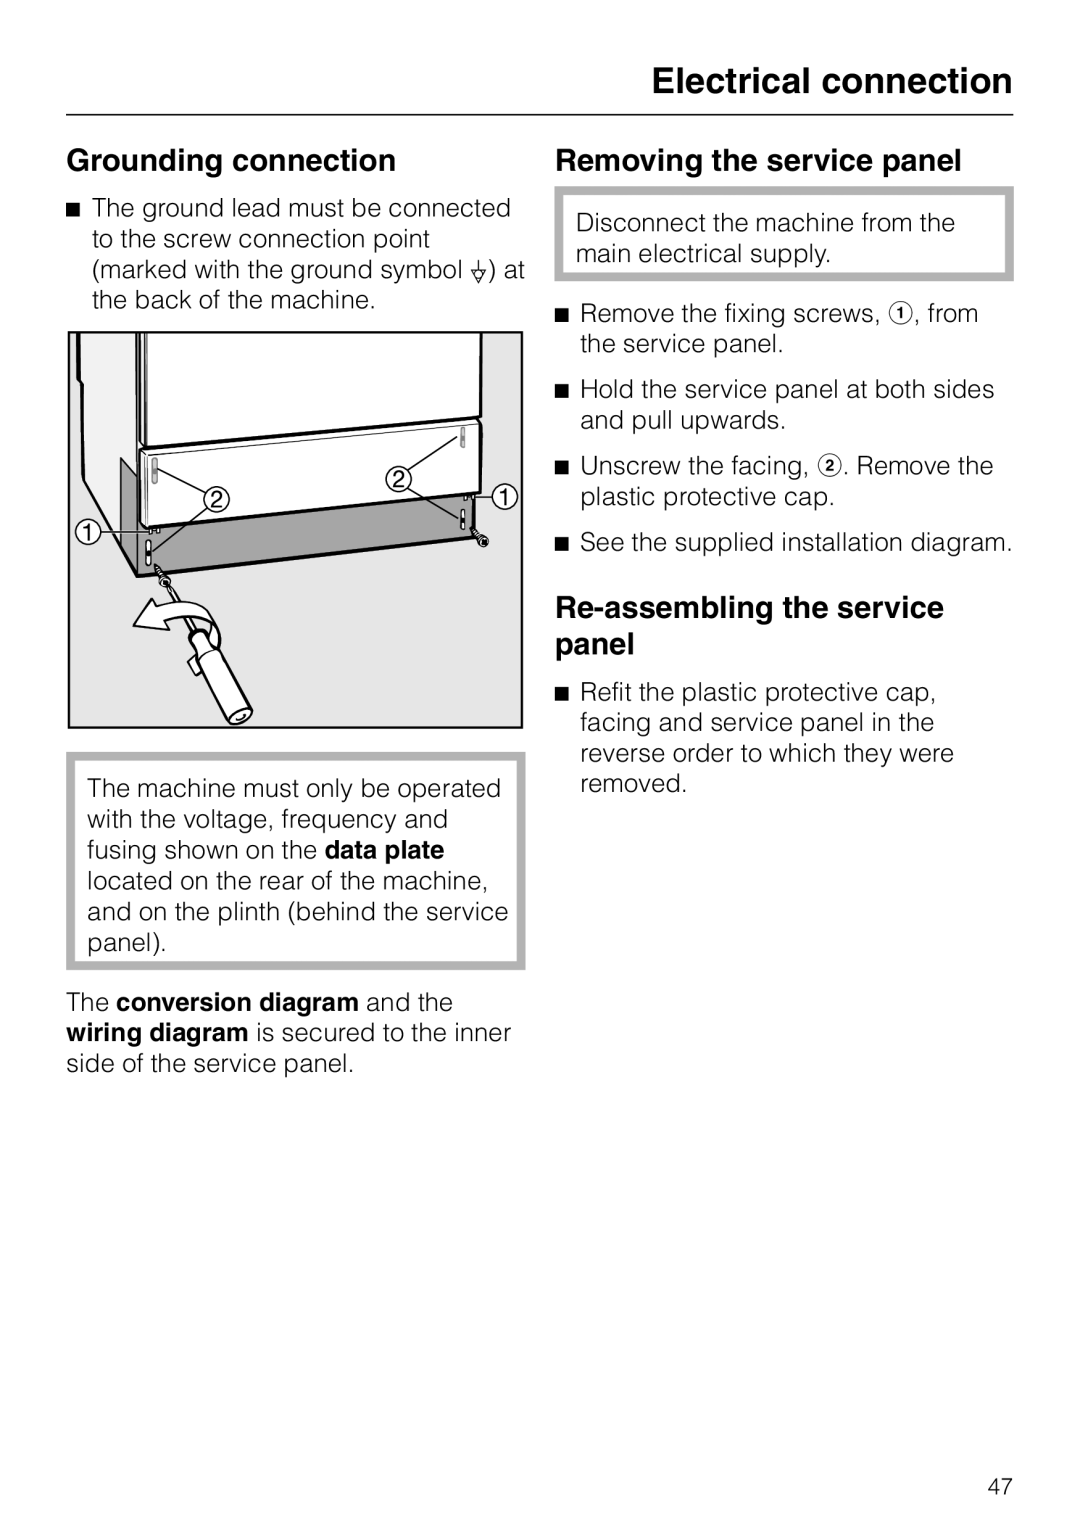 Miele G 7804 manual Grounding connection, Removing the service panel, Re-assemblingthe service panel, Electrical connection 